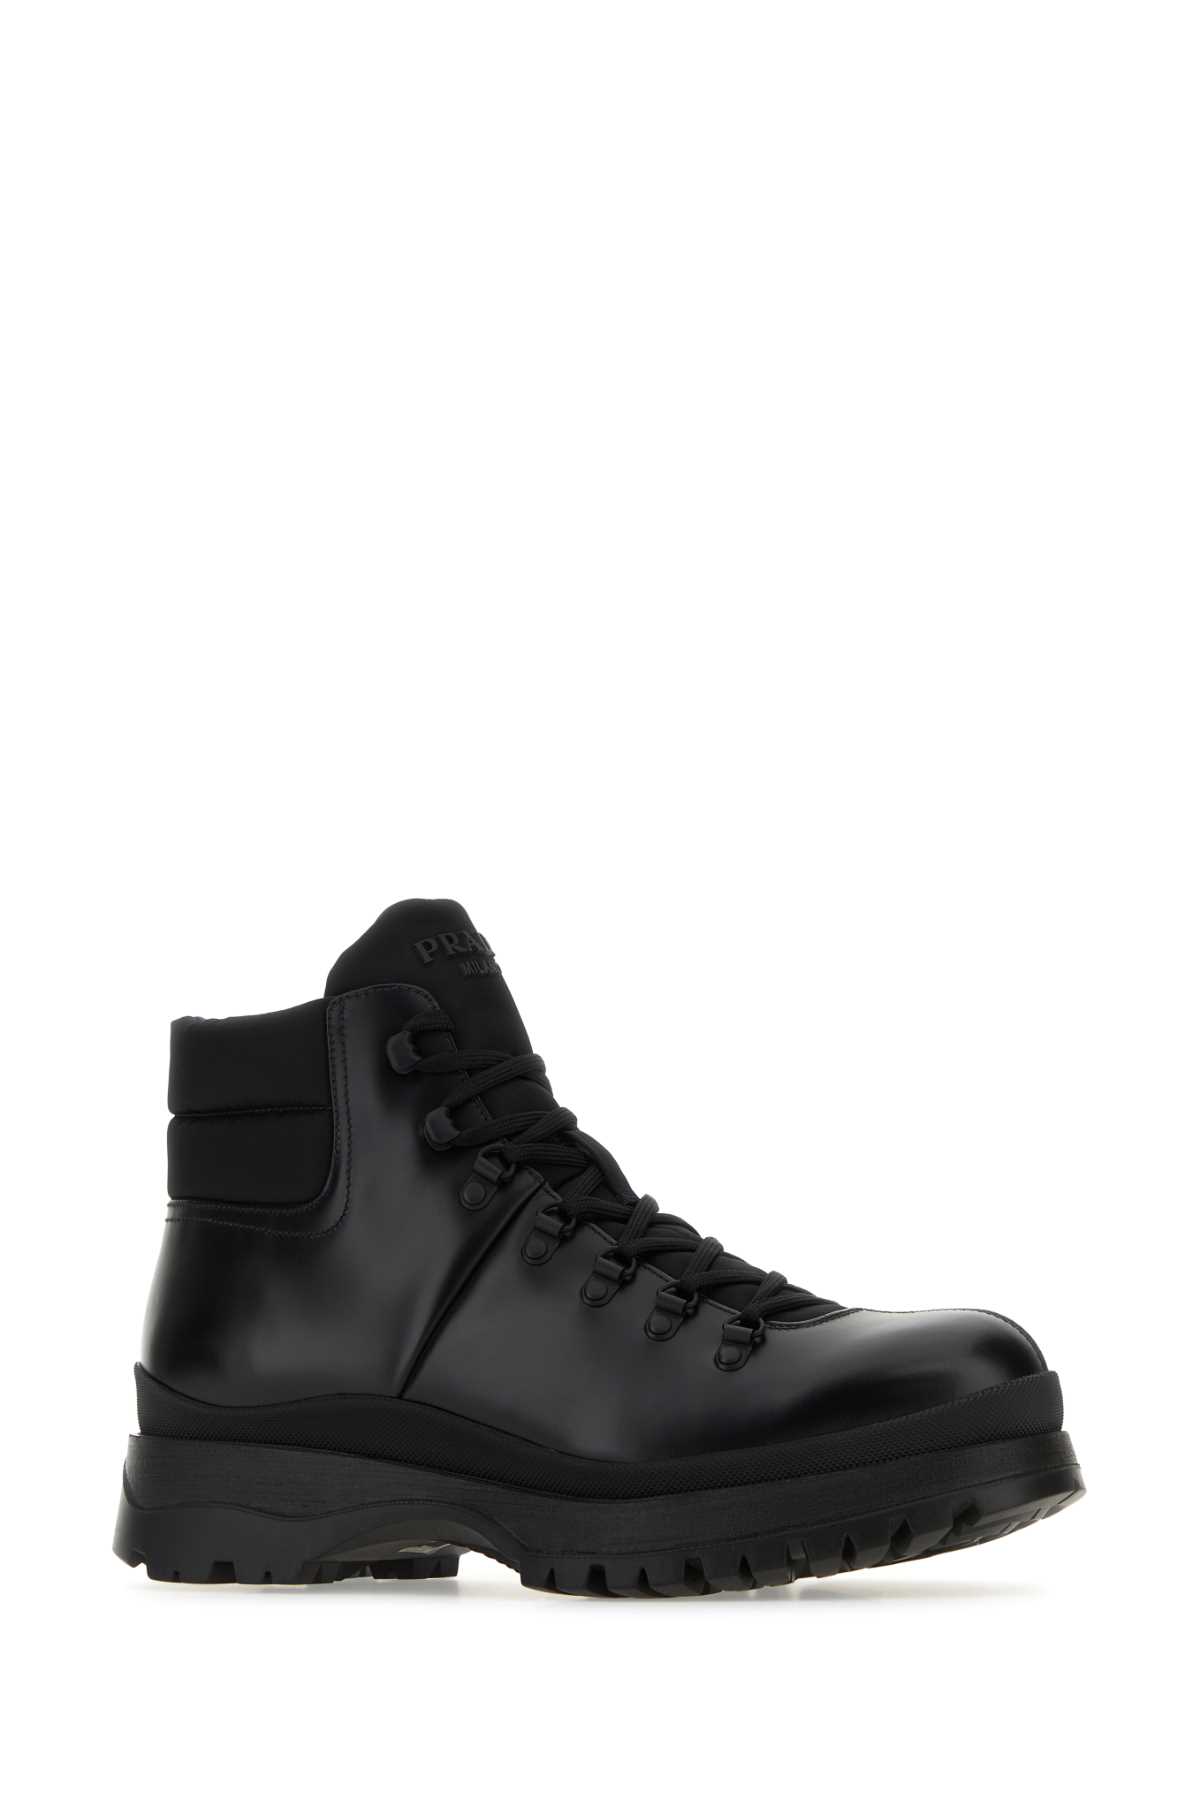 Shop Prada Black Re-nylon And Leather Brixxen Ankle Boots In F0002